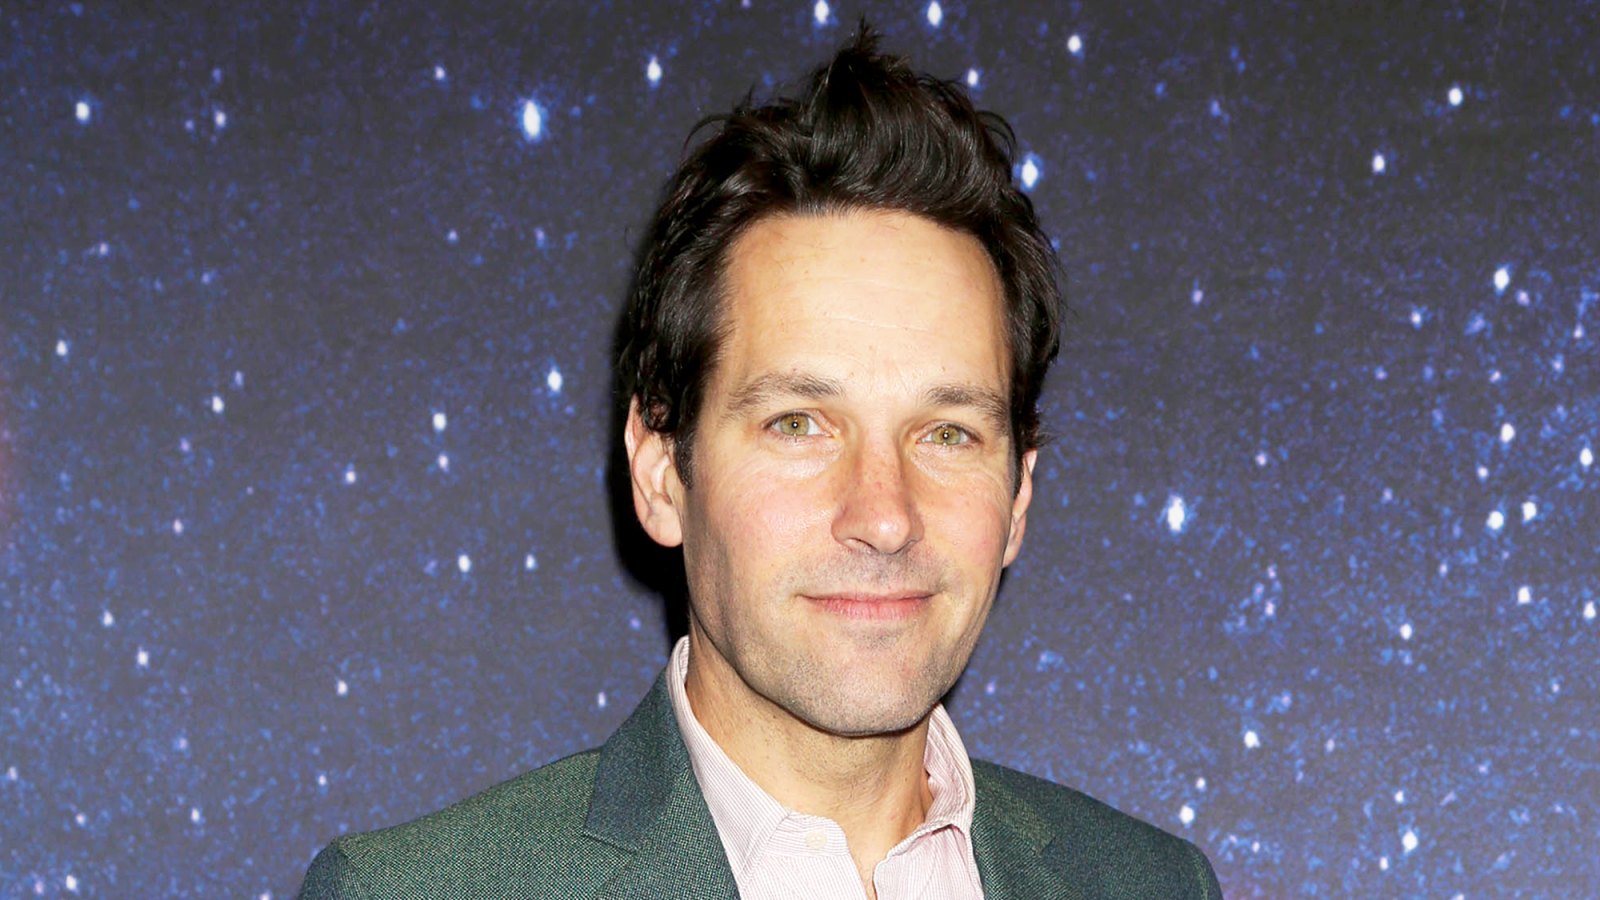 Paul Rudd attends the 2017 'Meteor Shower' Broadway Opening Night at the Booth Theatre in New York City.